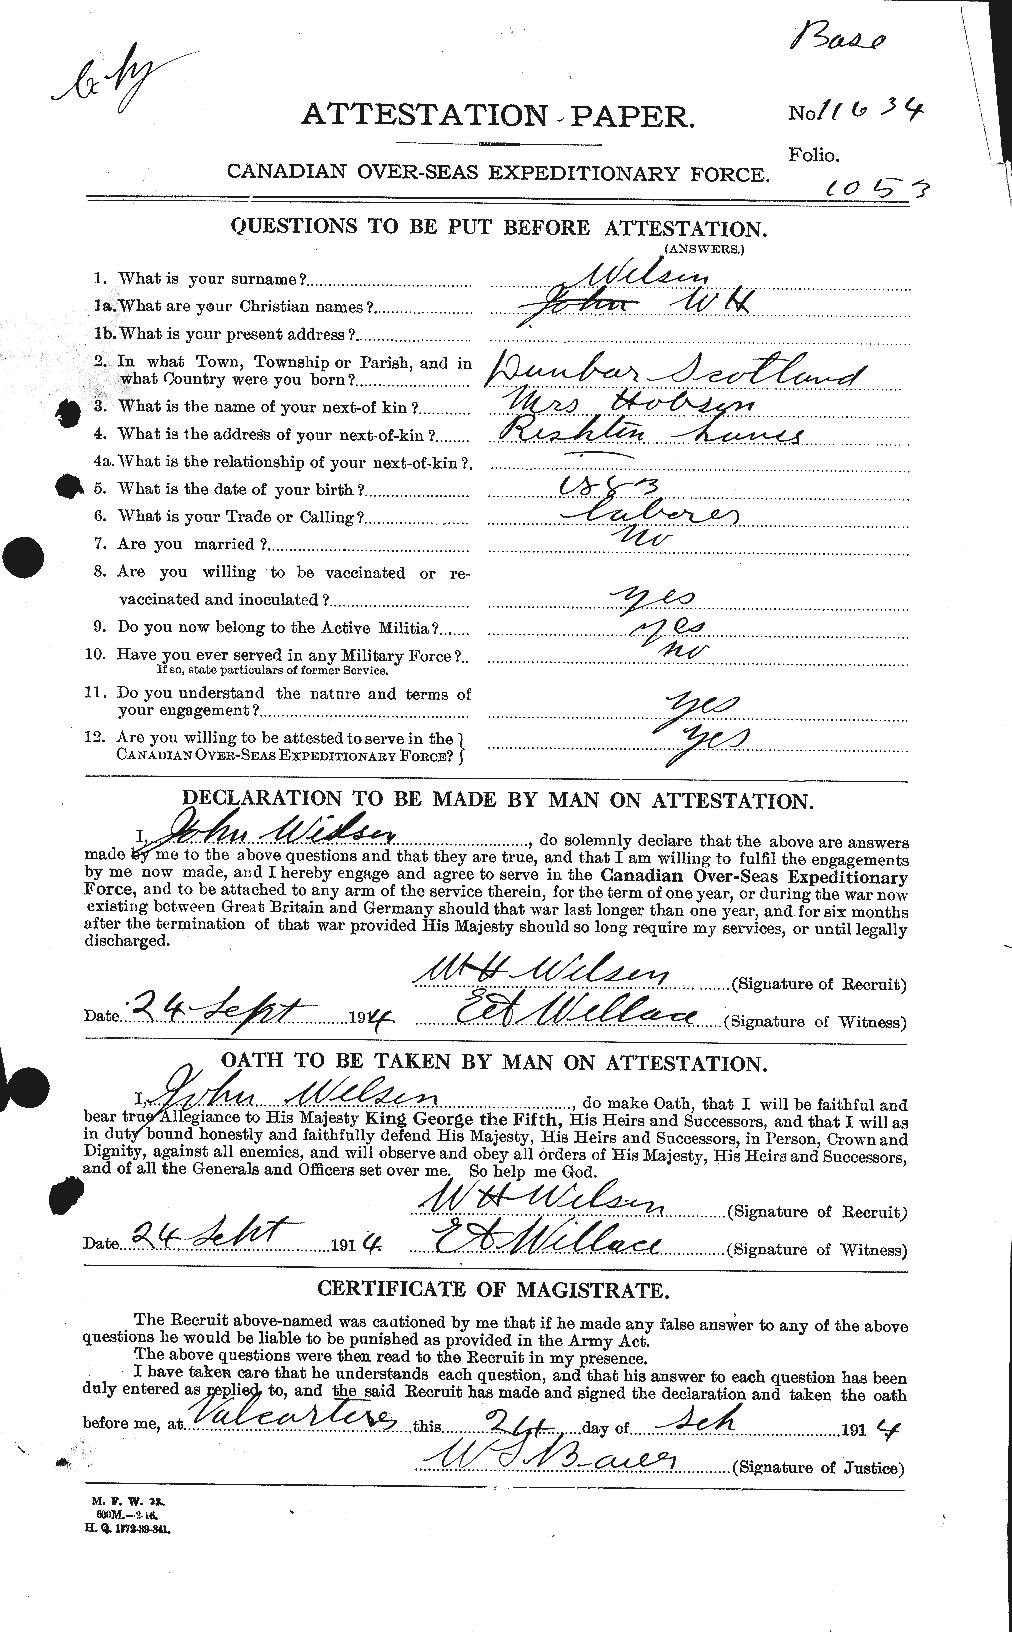 Personnel Records of the First World War - CEF 681719a